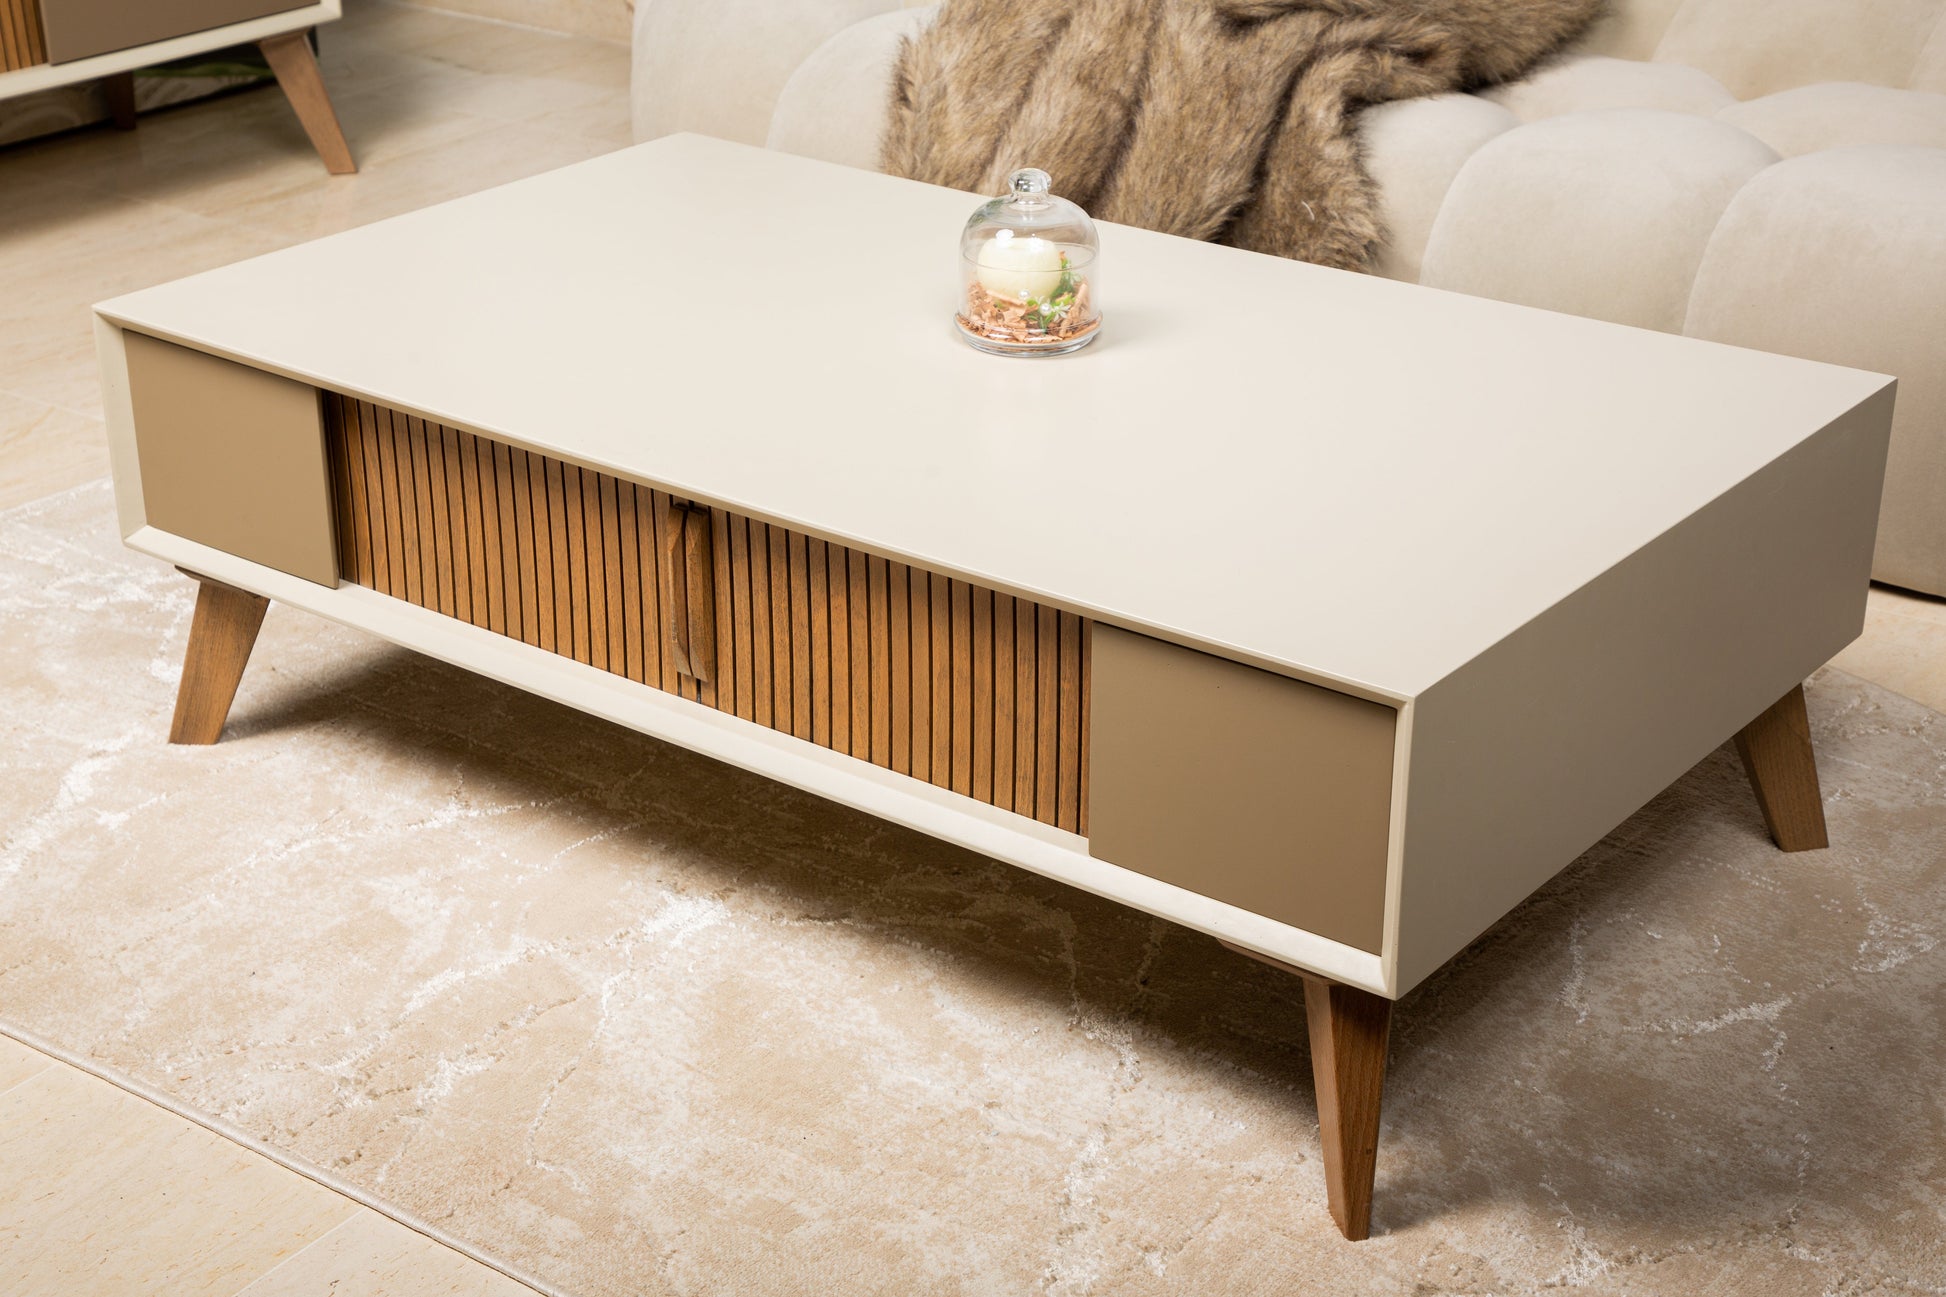 Set the Scene for Coffee, Cocktails & Conversation with Stylish Coffee Tables from like.furniture.